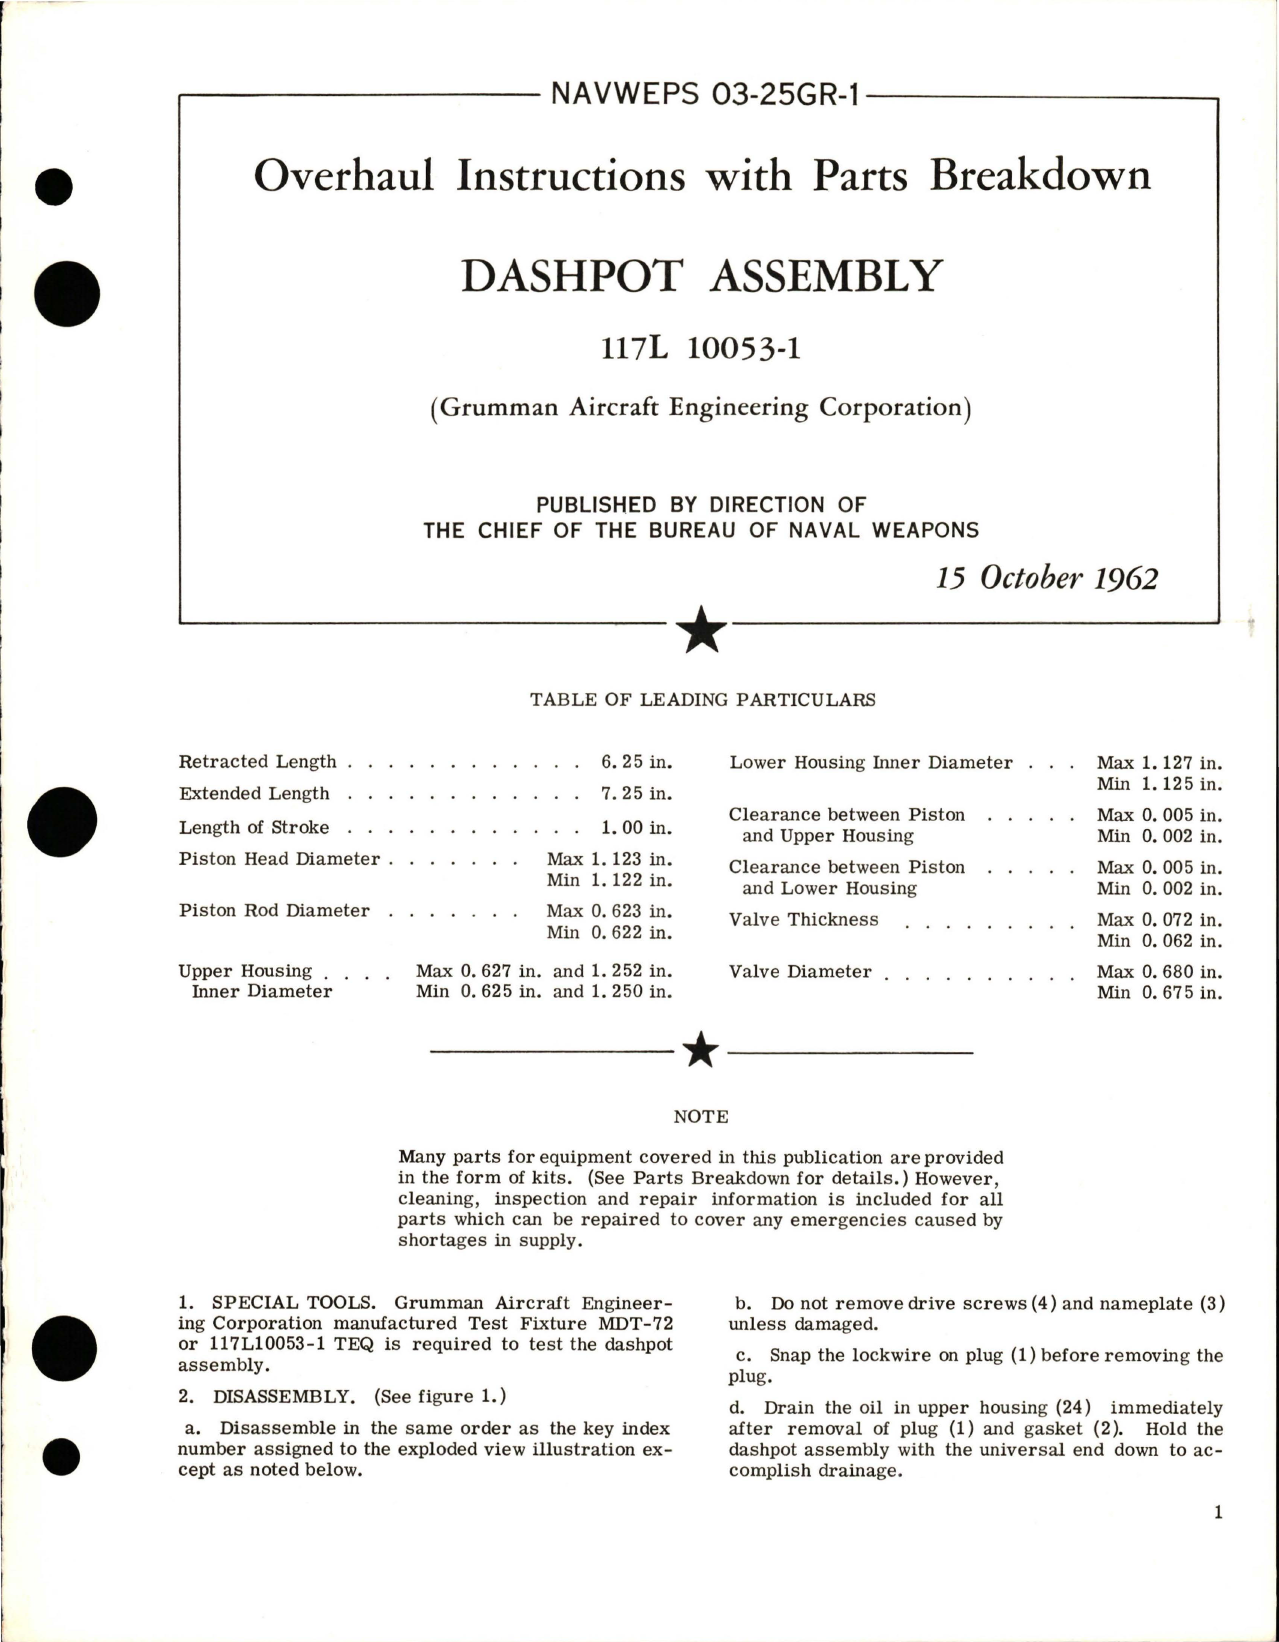 Sample page 1 from AirCorps Library document: Overhaul Instructions with Parts Breakdown for Dashpot Assembly - 117L 10053-1